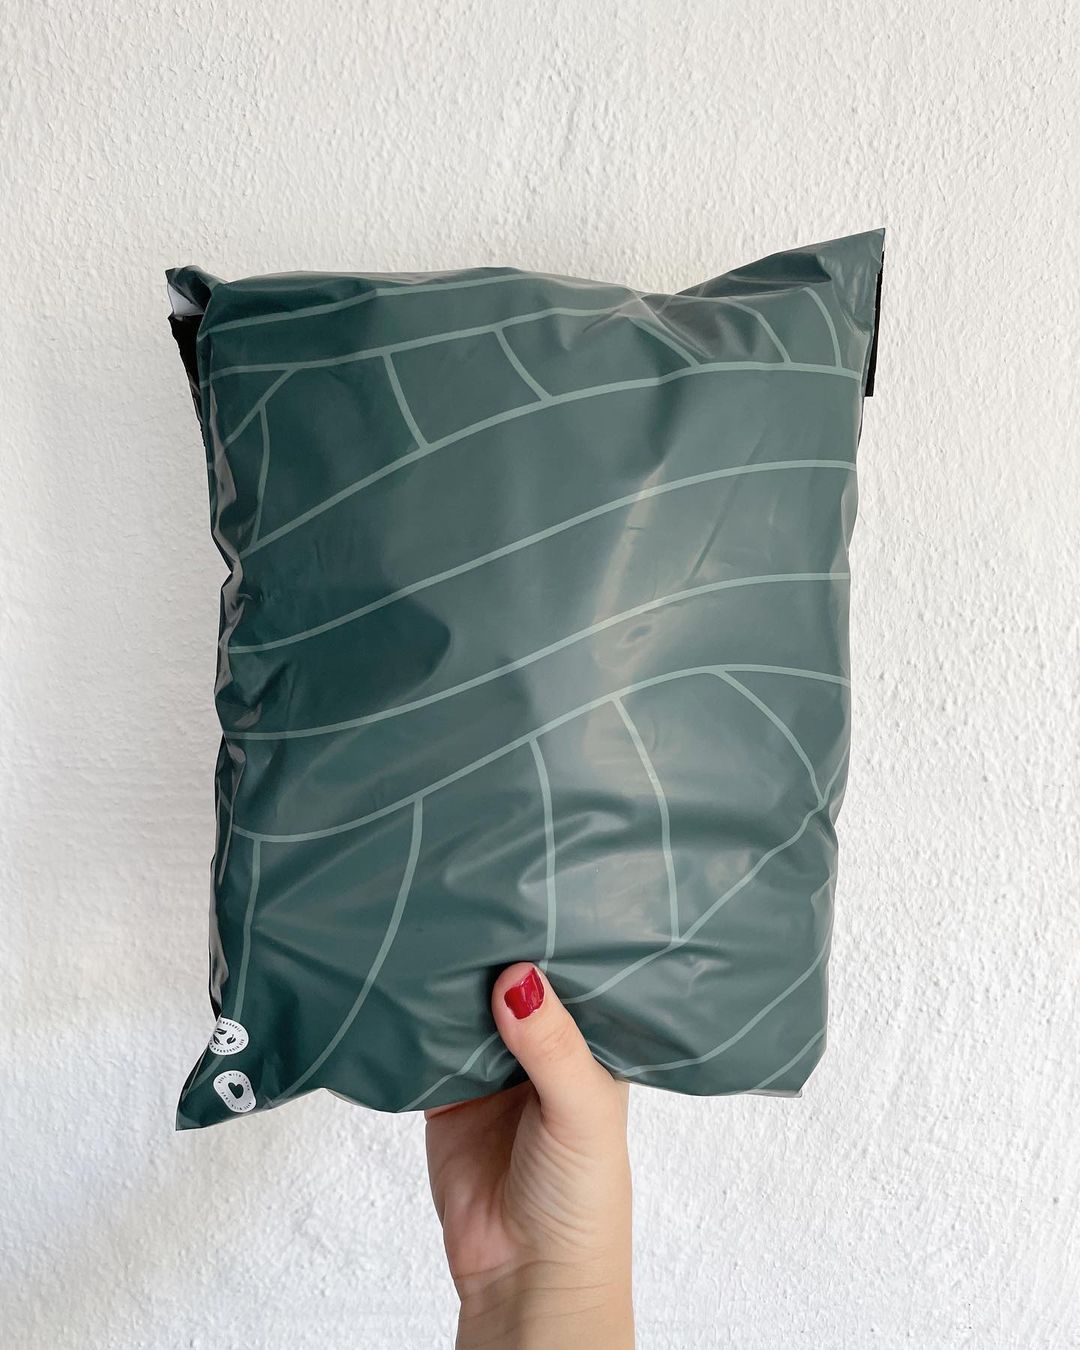 A person holding up a recyclable Olive Leaf Biodegradable Mailers 10" x 13" pillow by impack.co.